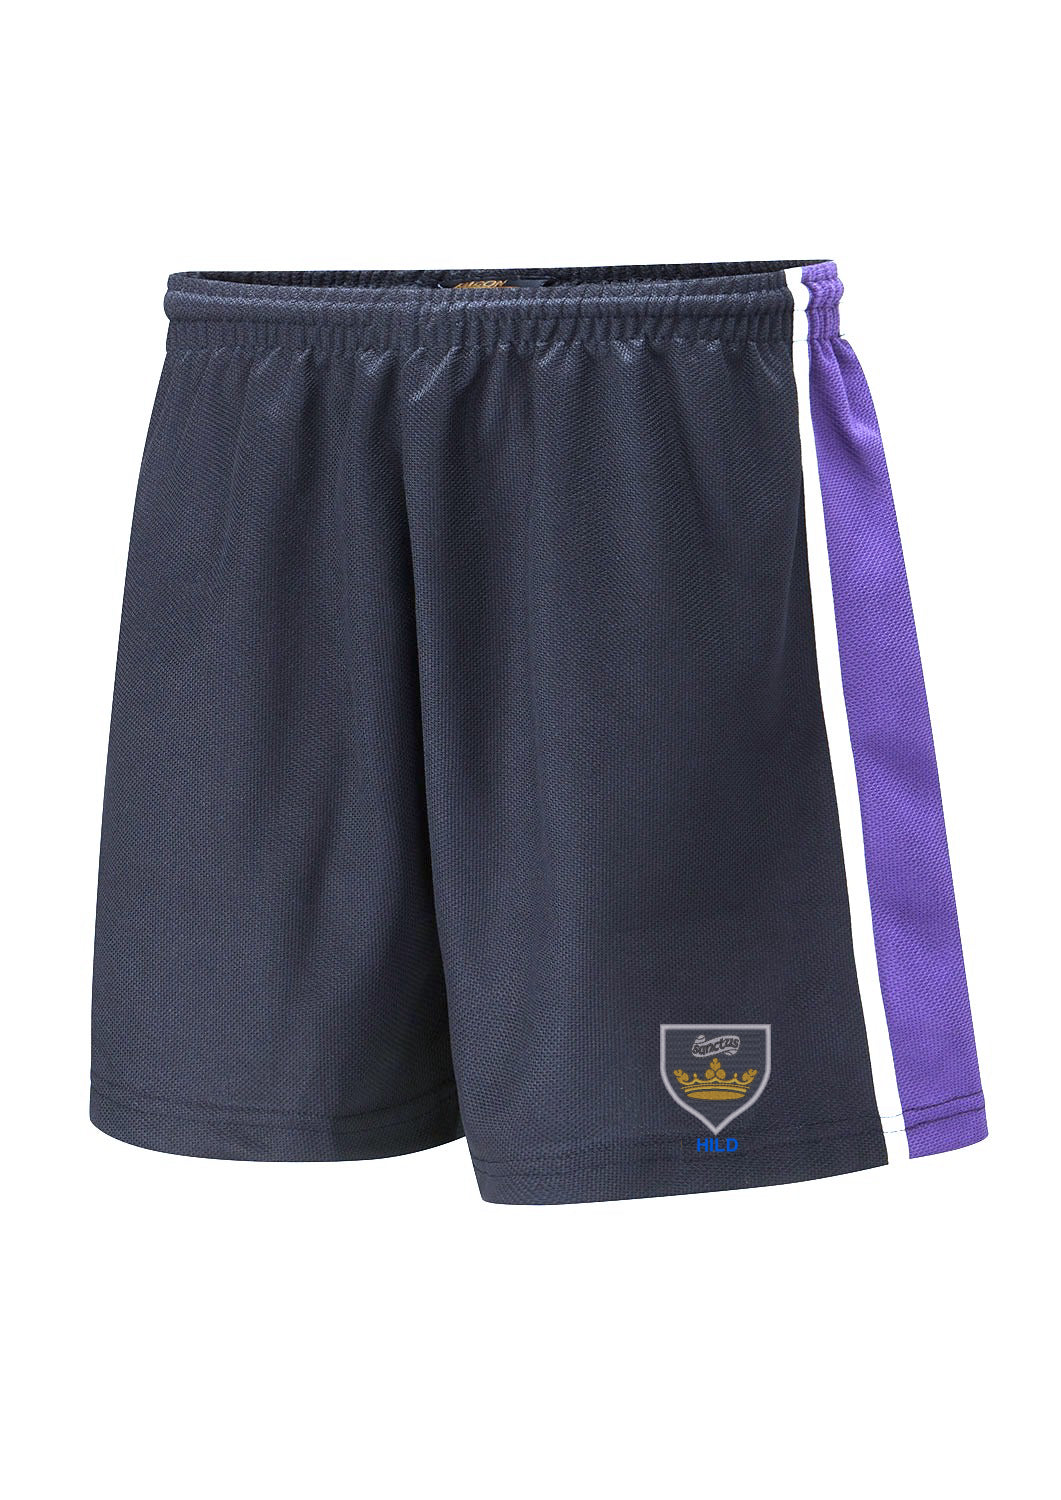 All Saints Navy, Purple And White Sport Shorts (House Hild)